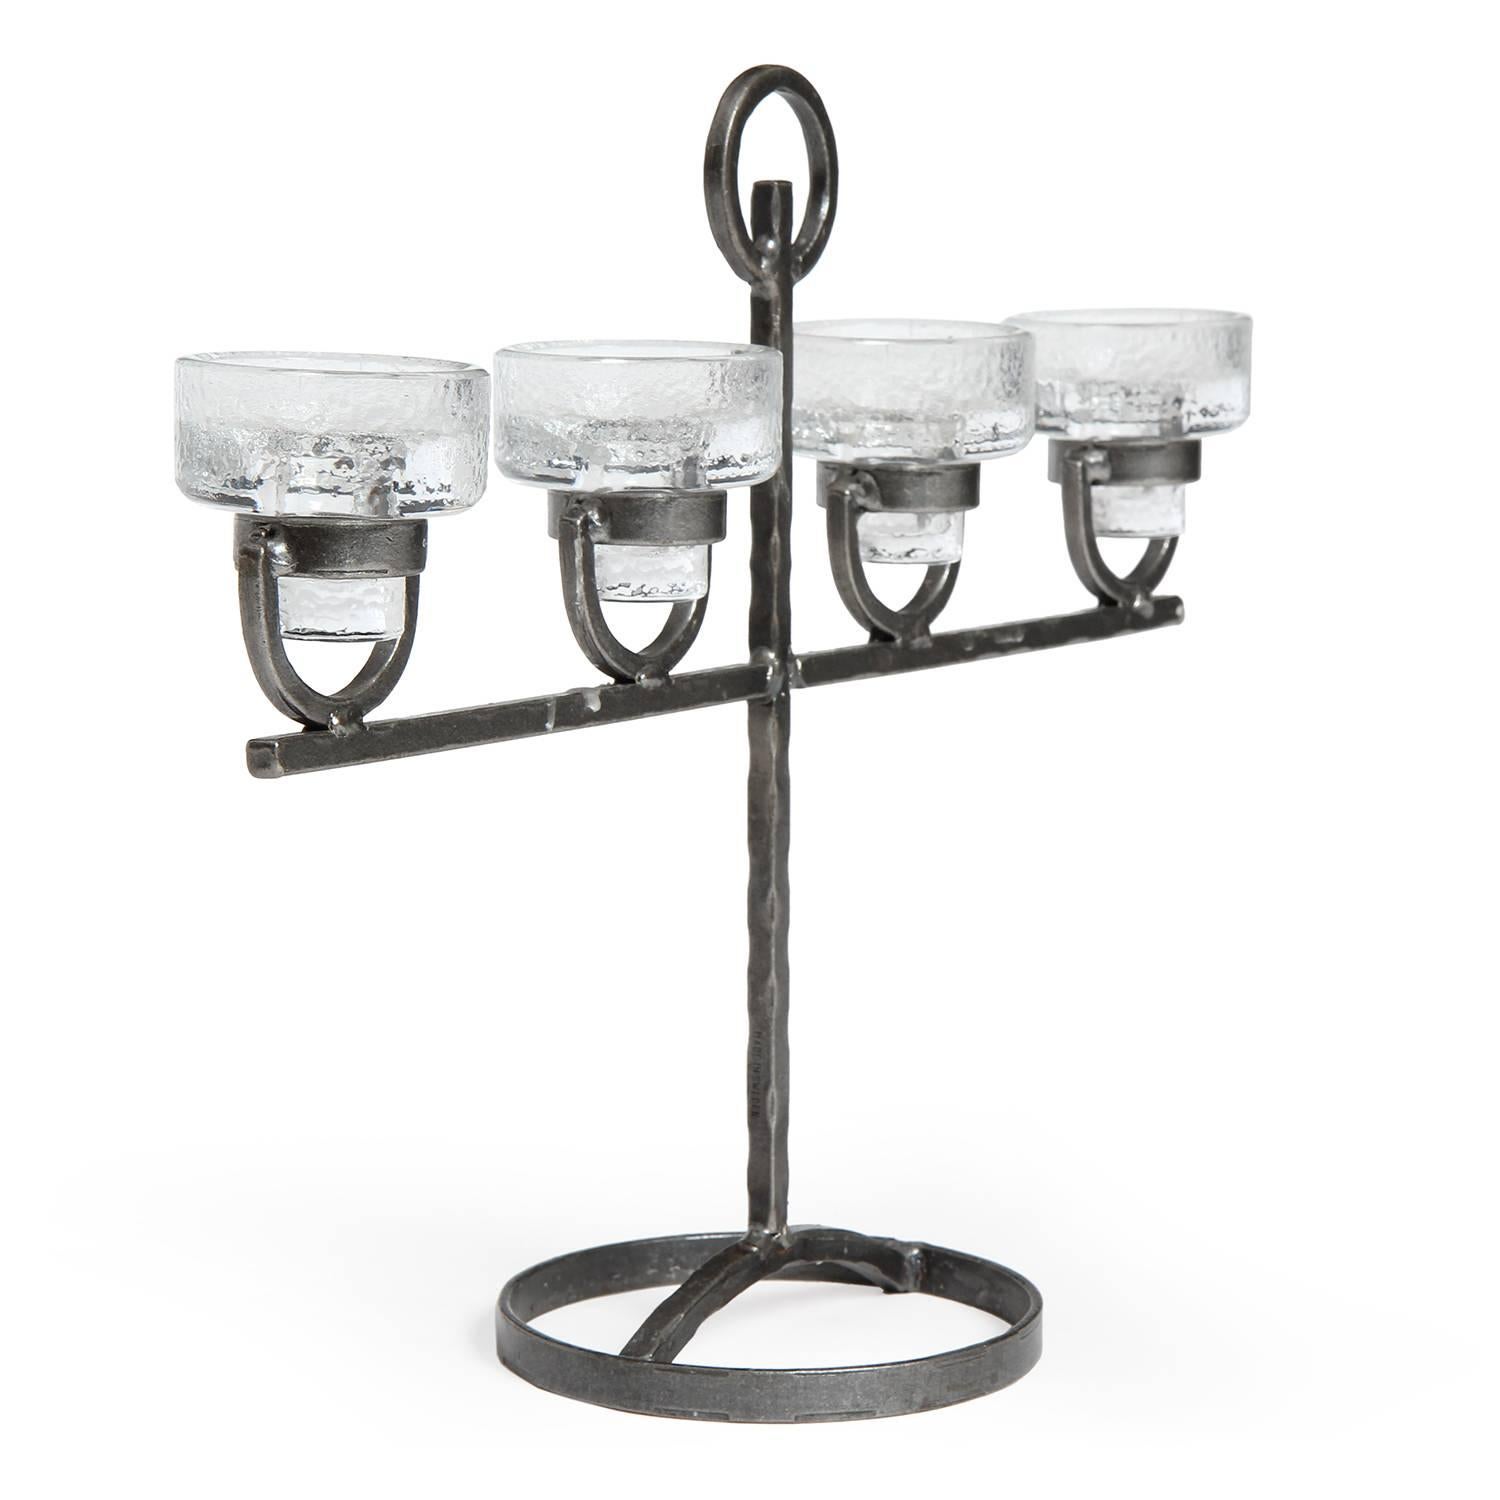 A rustic and expressive candelabra having a hand forged iron frame supporting four cast textured glass candle holders. 